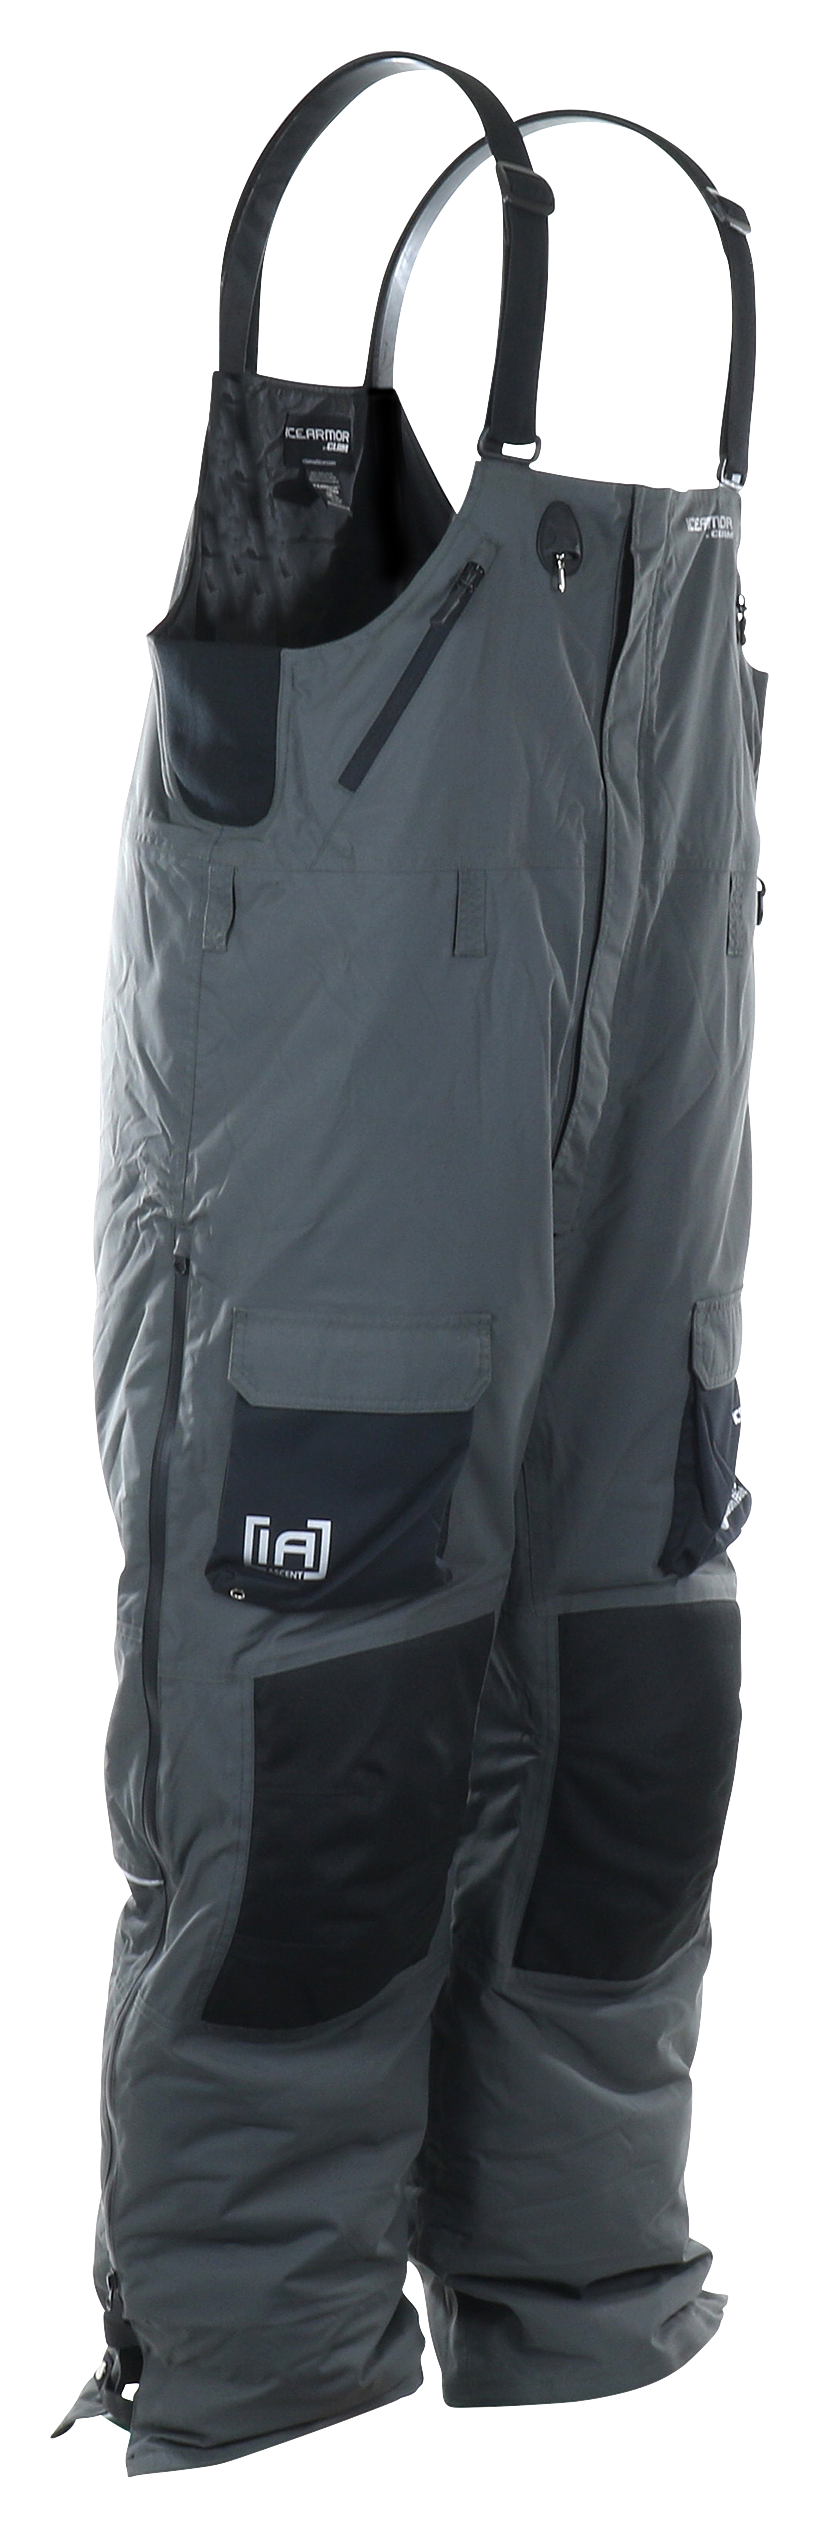 IceArmor by Clam Ascent Float Bib